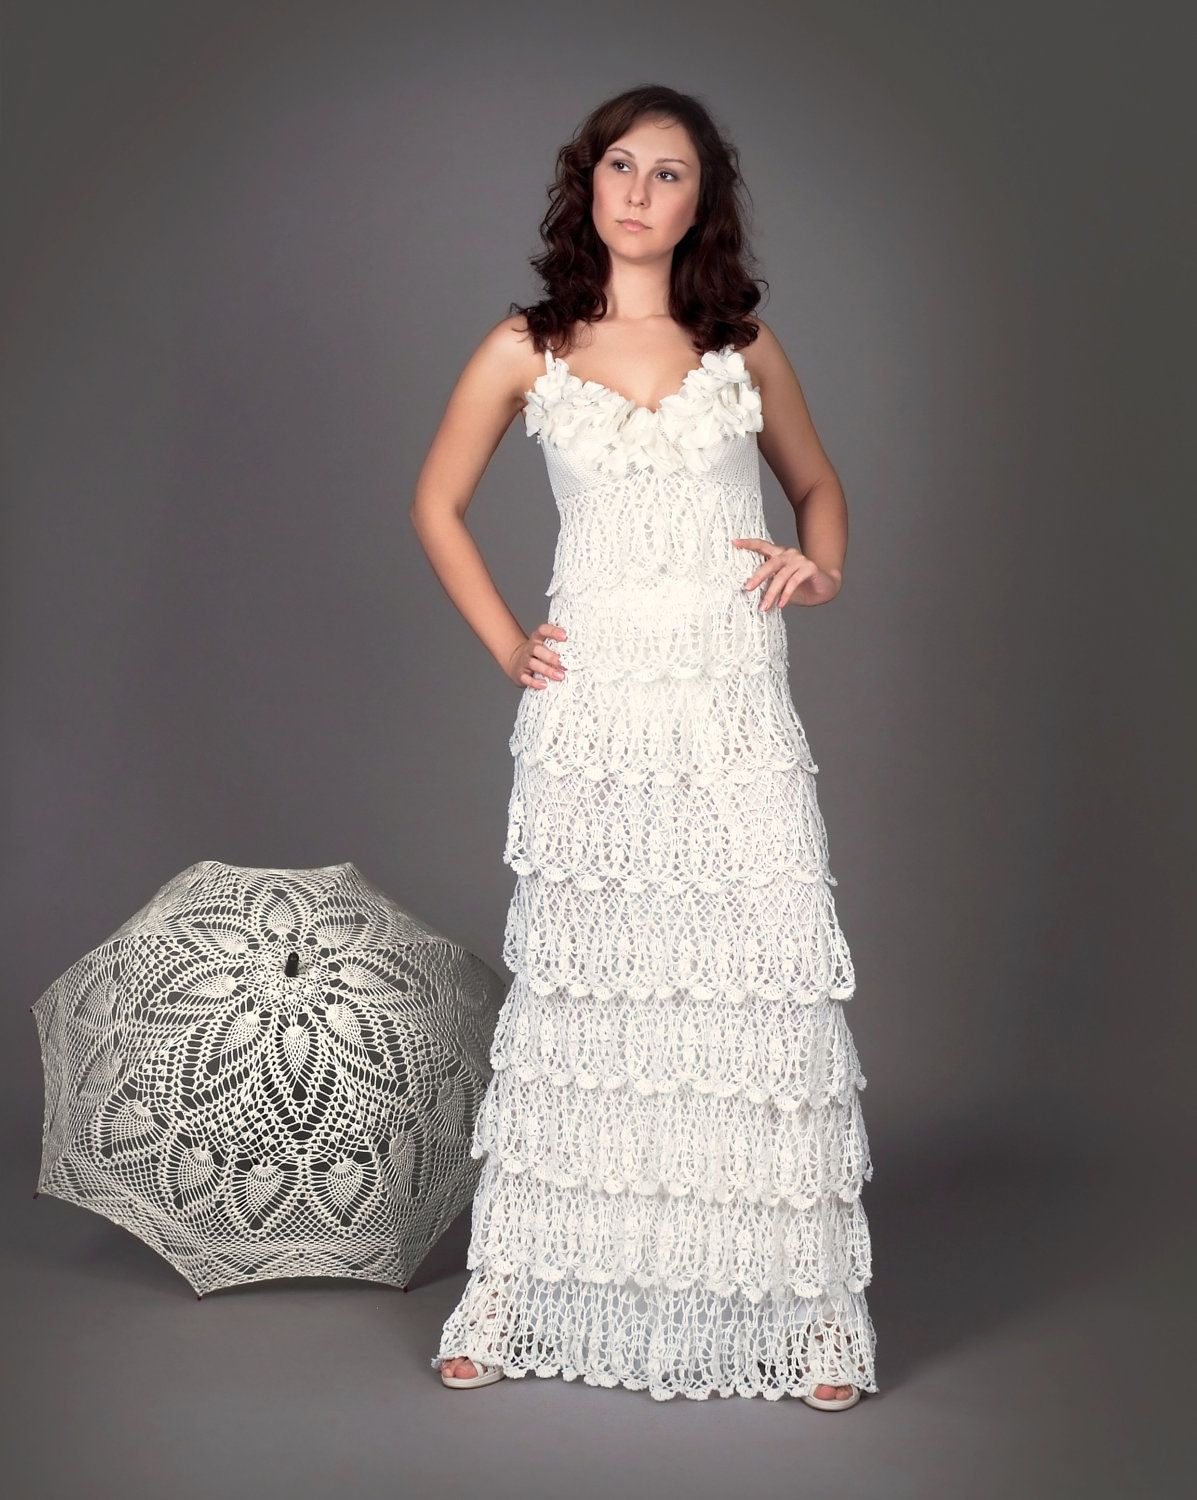 Crochet Wedding Dress Pattern Exclusive Crochet Wedding Dress With Ruffles The Finished Product